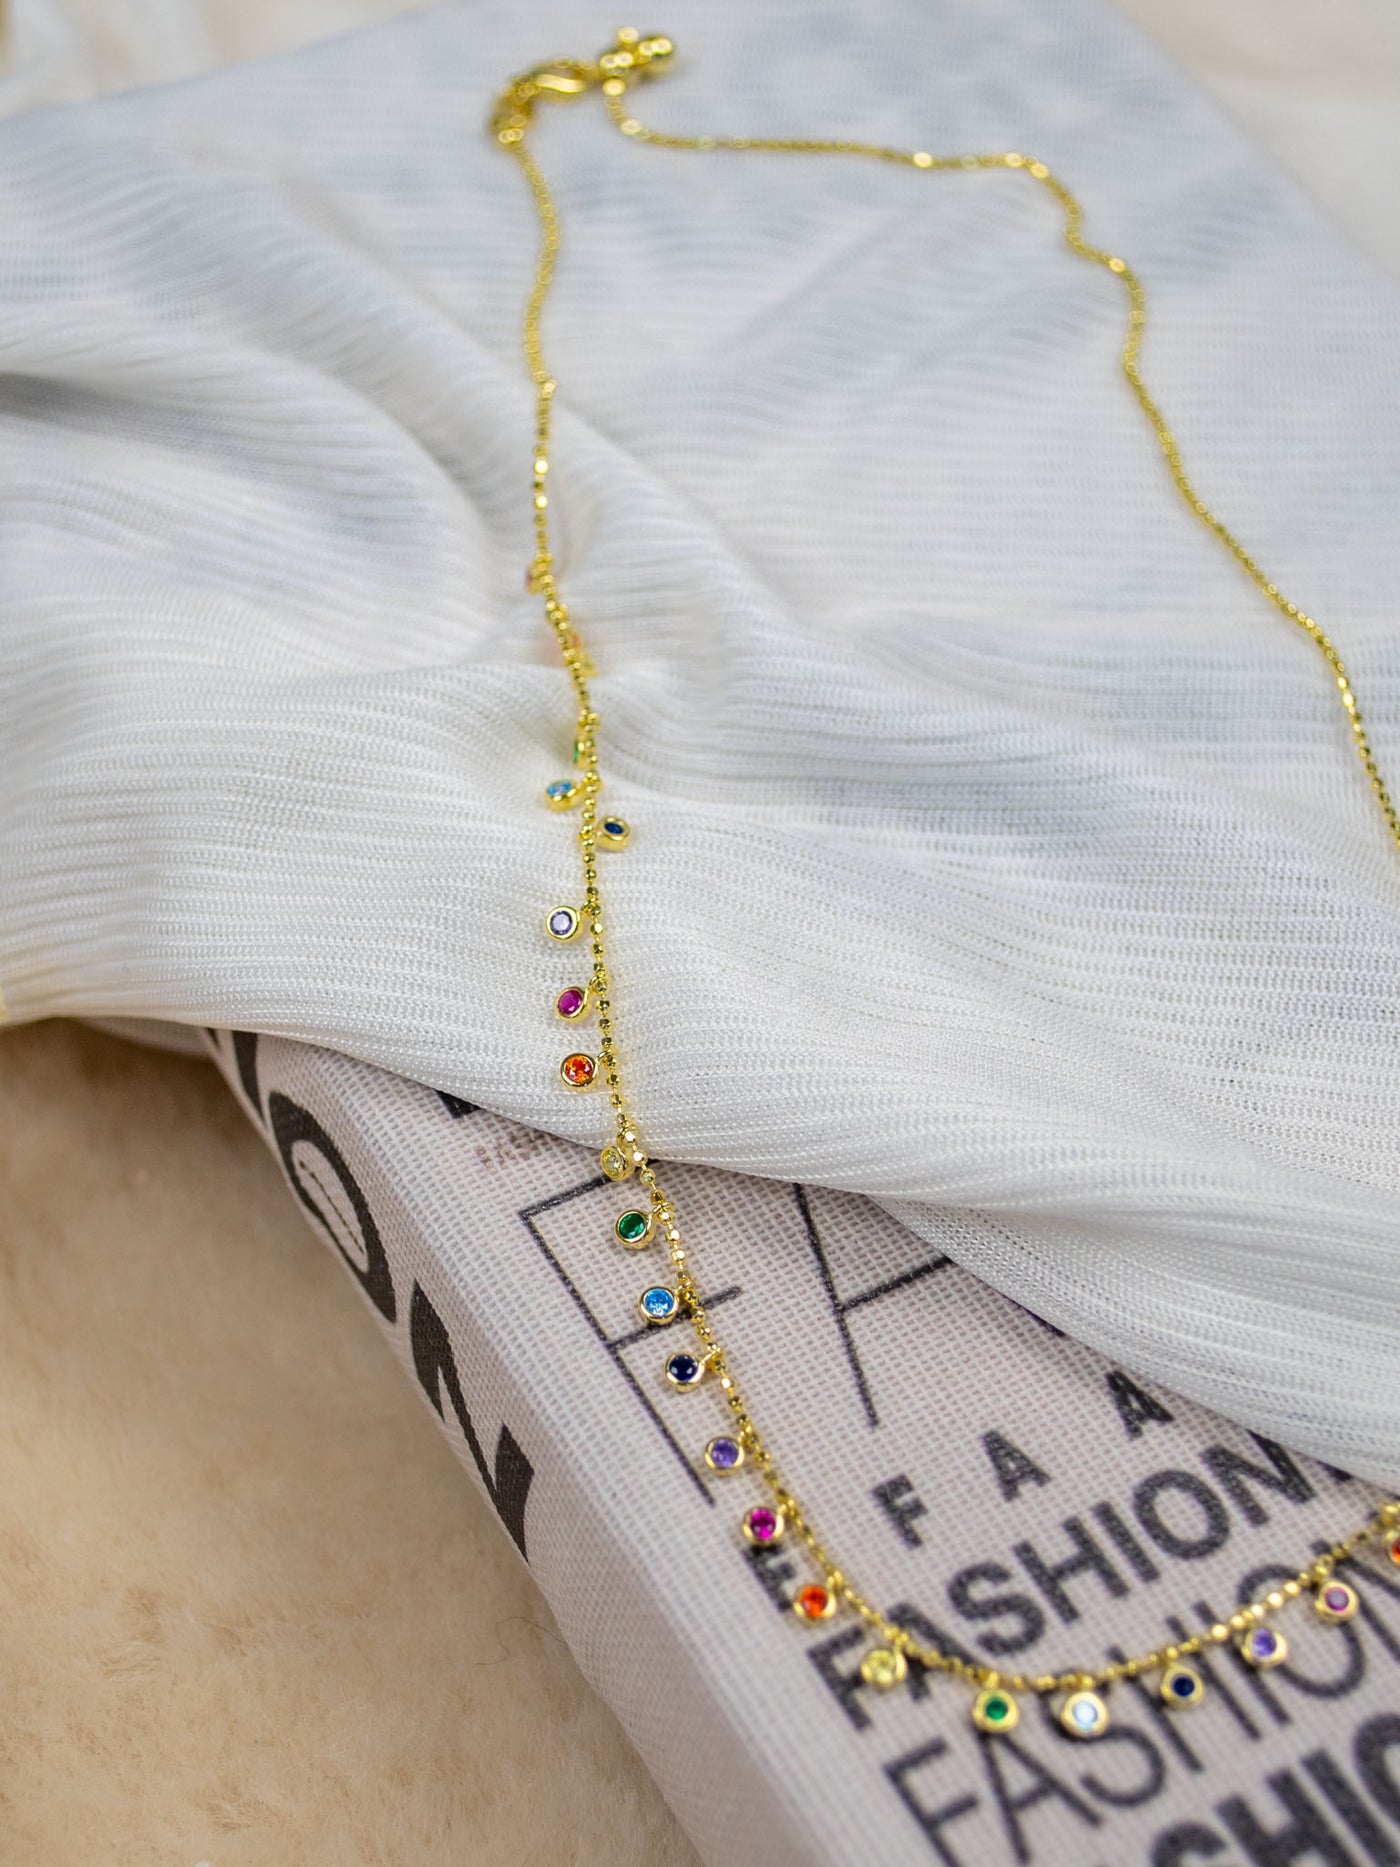 A gold choker necklace with many colorful CZ stones dangling off the front.